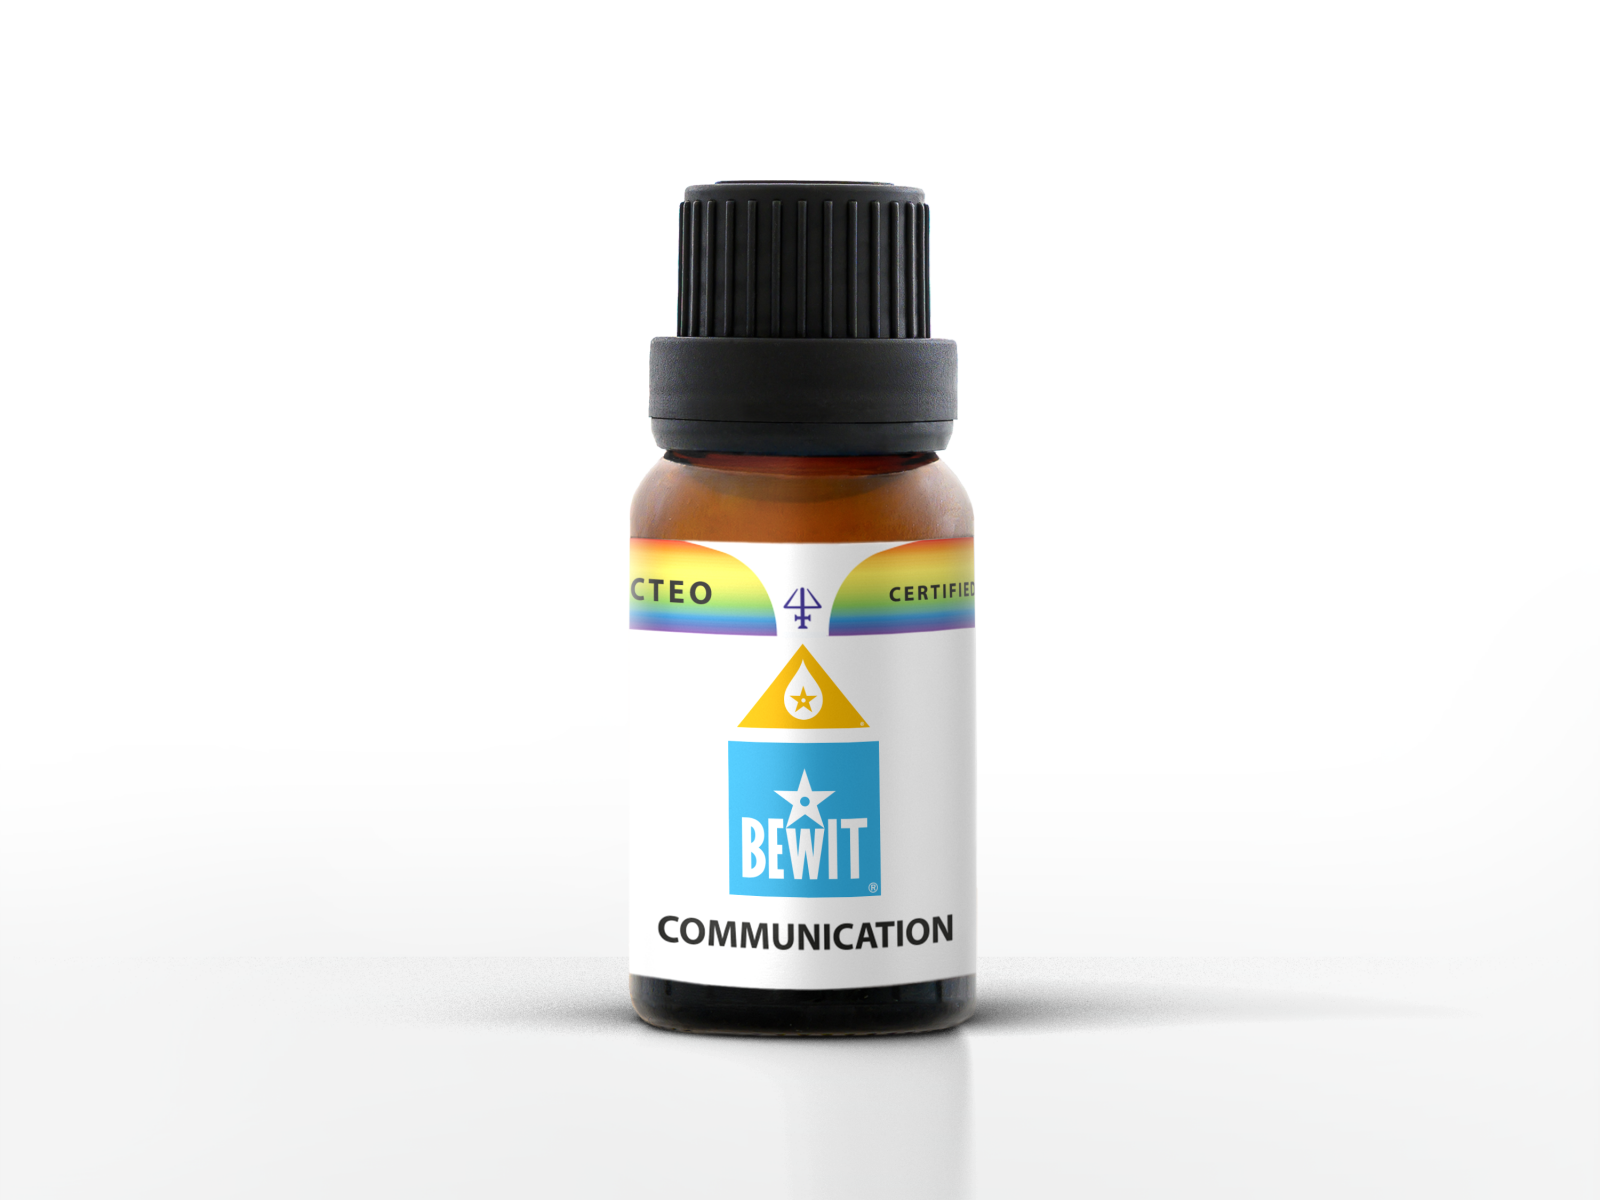 BEWIT COMMUNICATION - Blend of essential oils